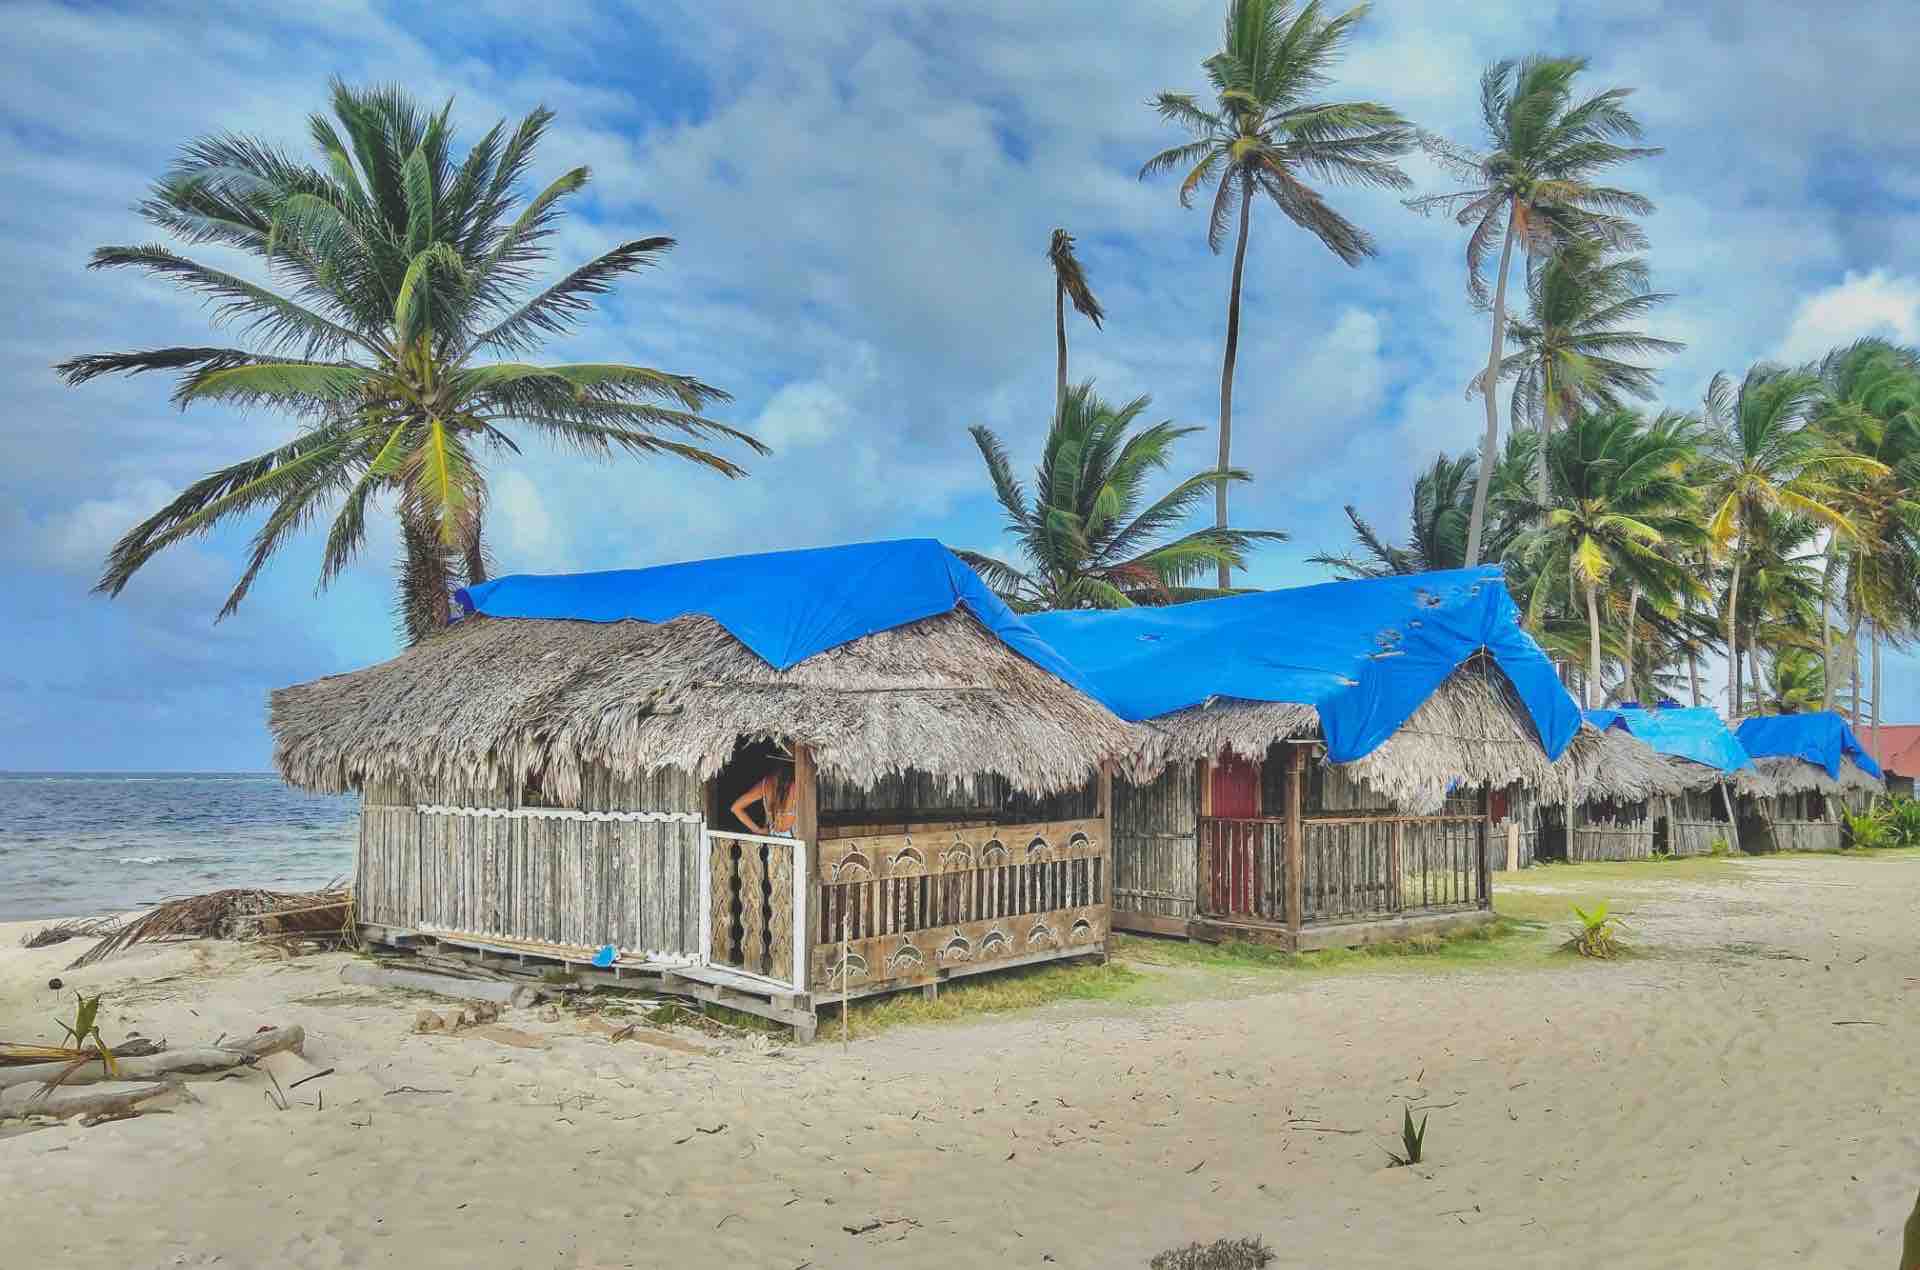 San Blas Isla Guanidup beach oceanfront cabins and palm trees